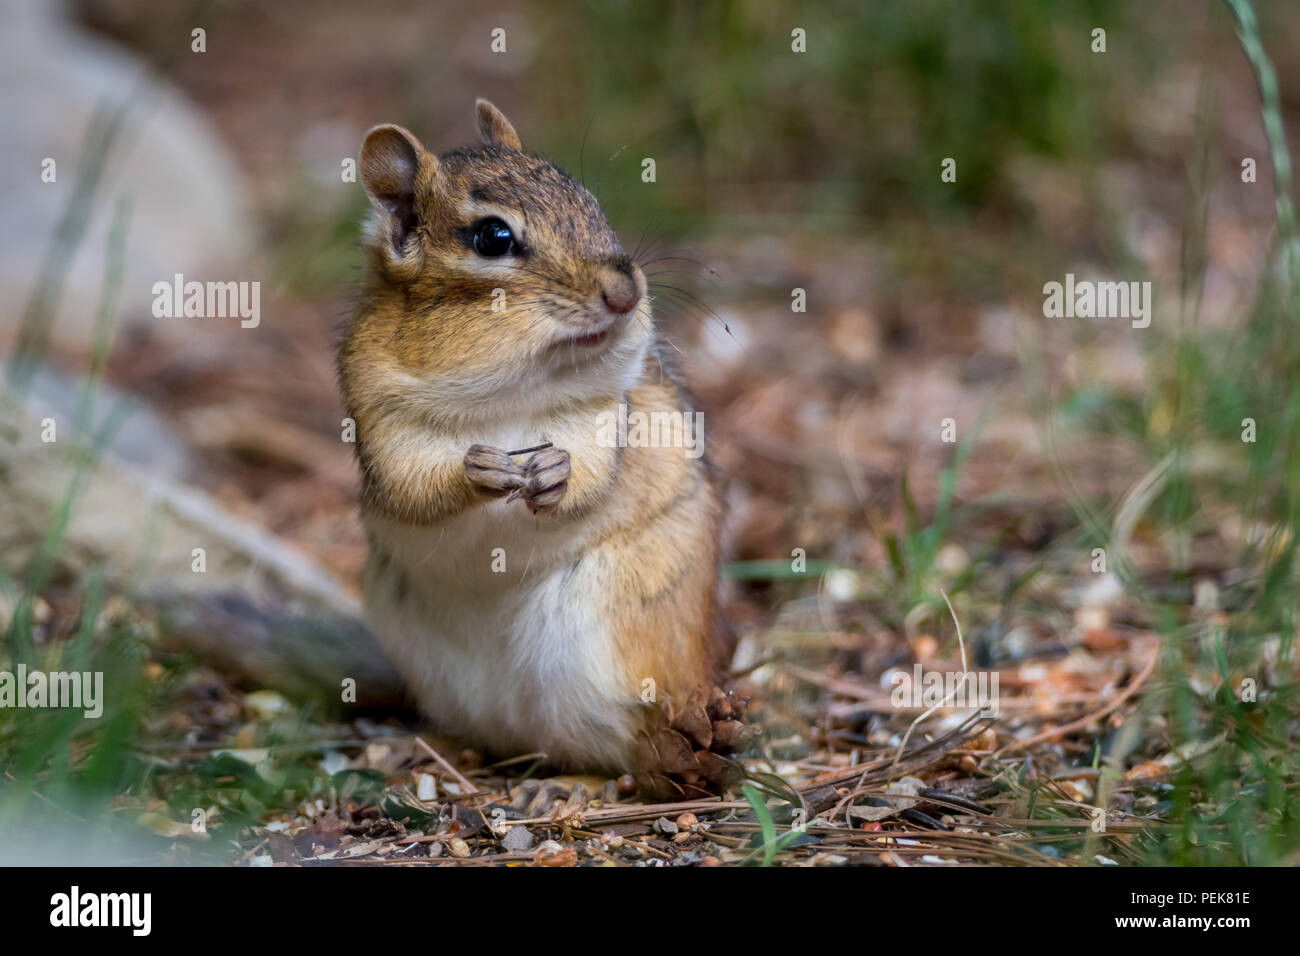 An Eastern Chipmunk (Tamias striatus) standing on hind feet and eating seeds. Stock Photo